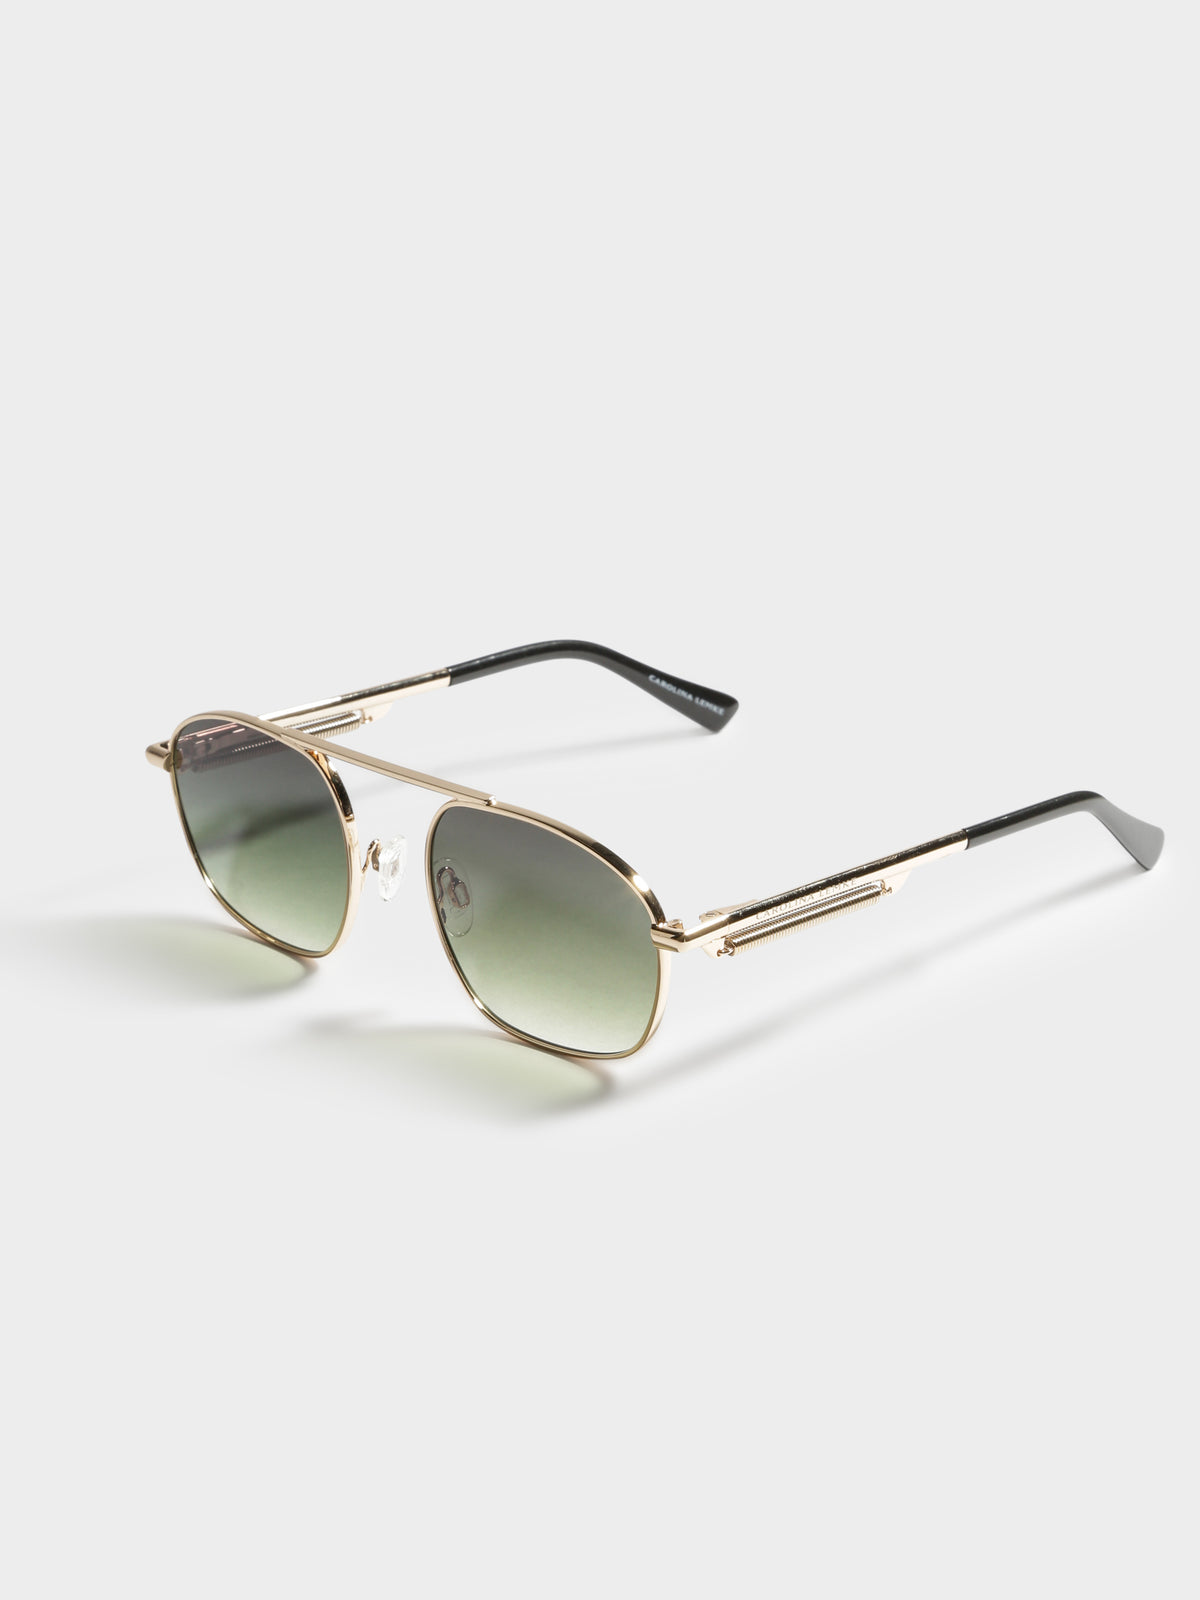 Solid sunglasses in Gold